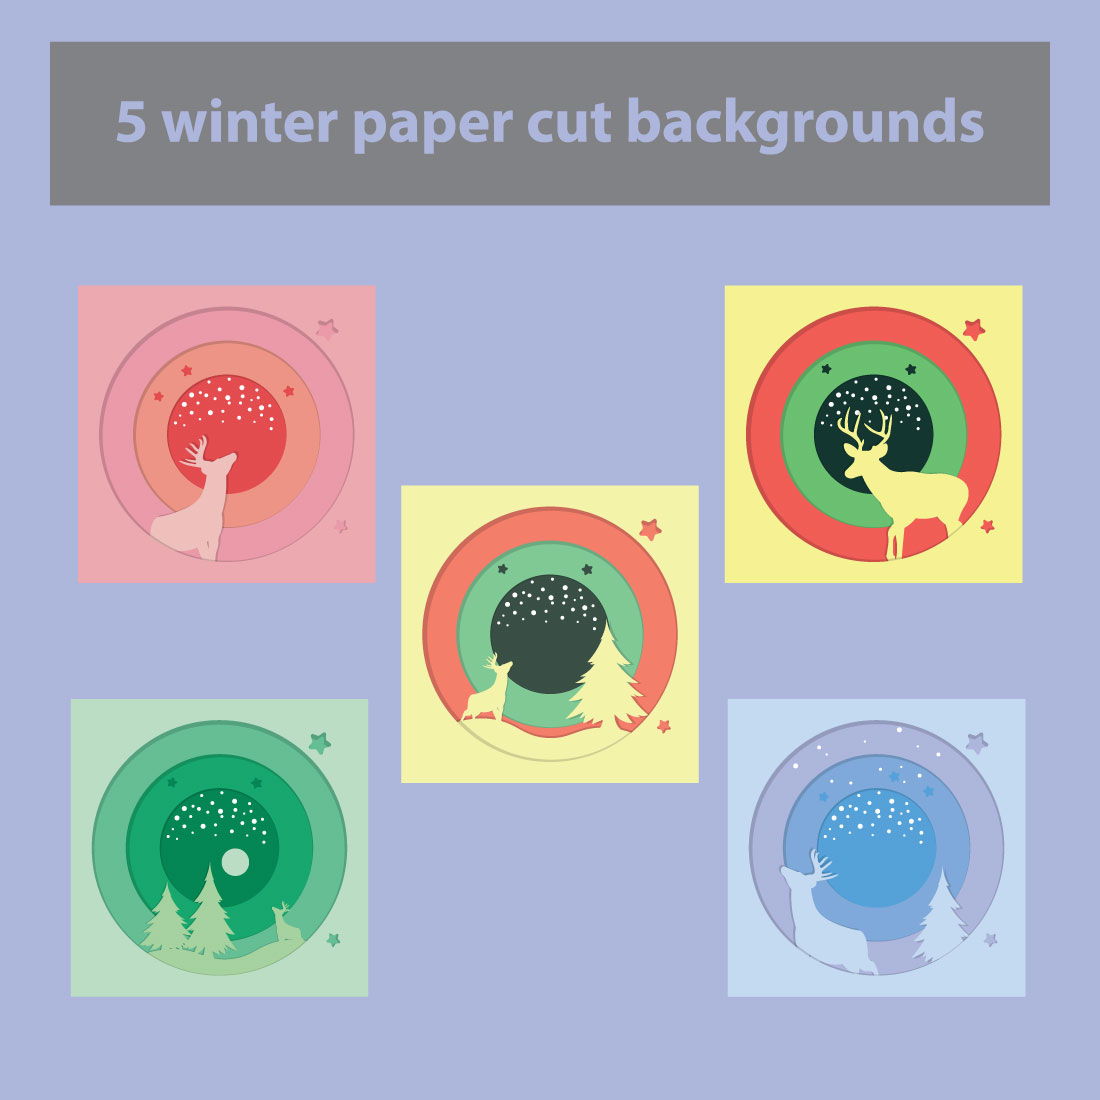 5 Winter Paper Cut Backgrounds cover image.